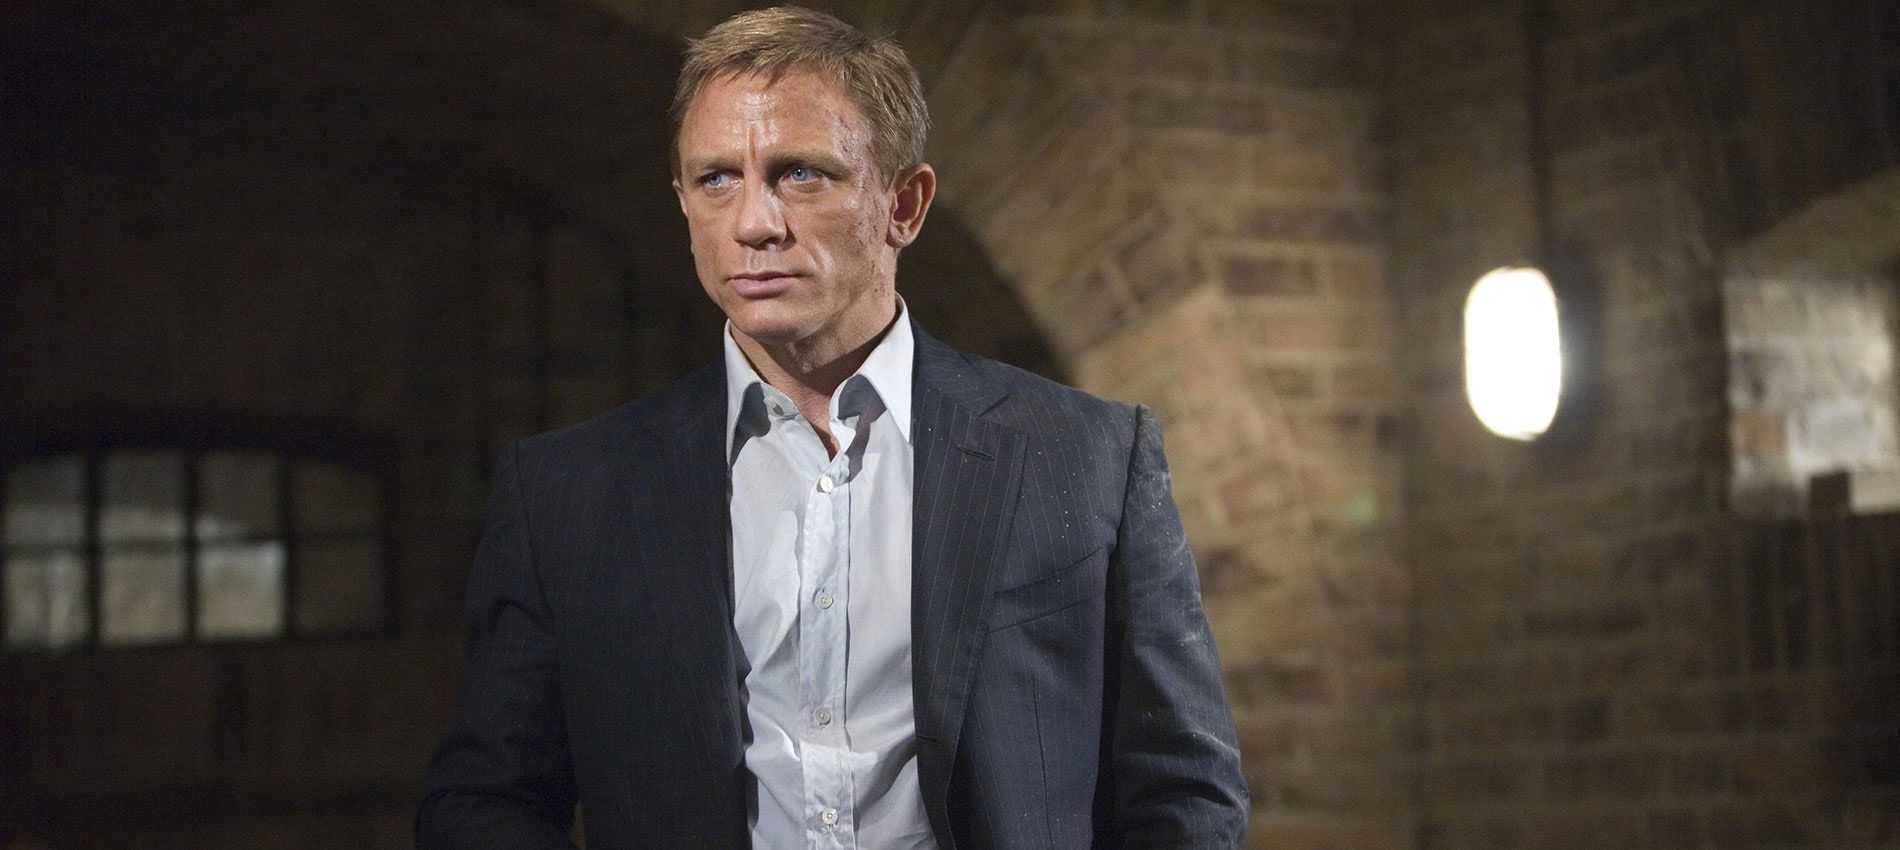 Where To Watch Daniel Craigs Bond Movies Online Before No Time To Die